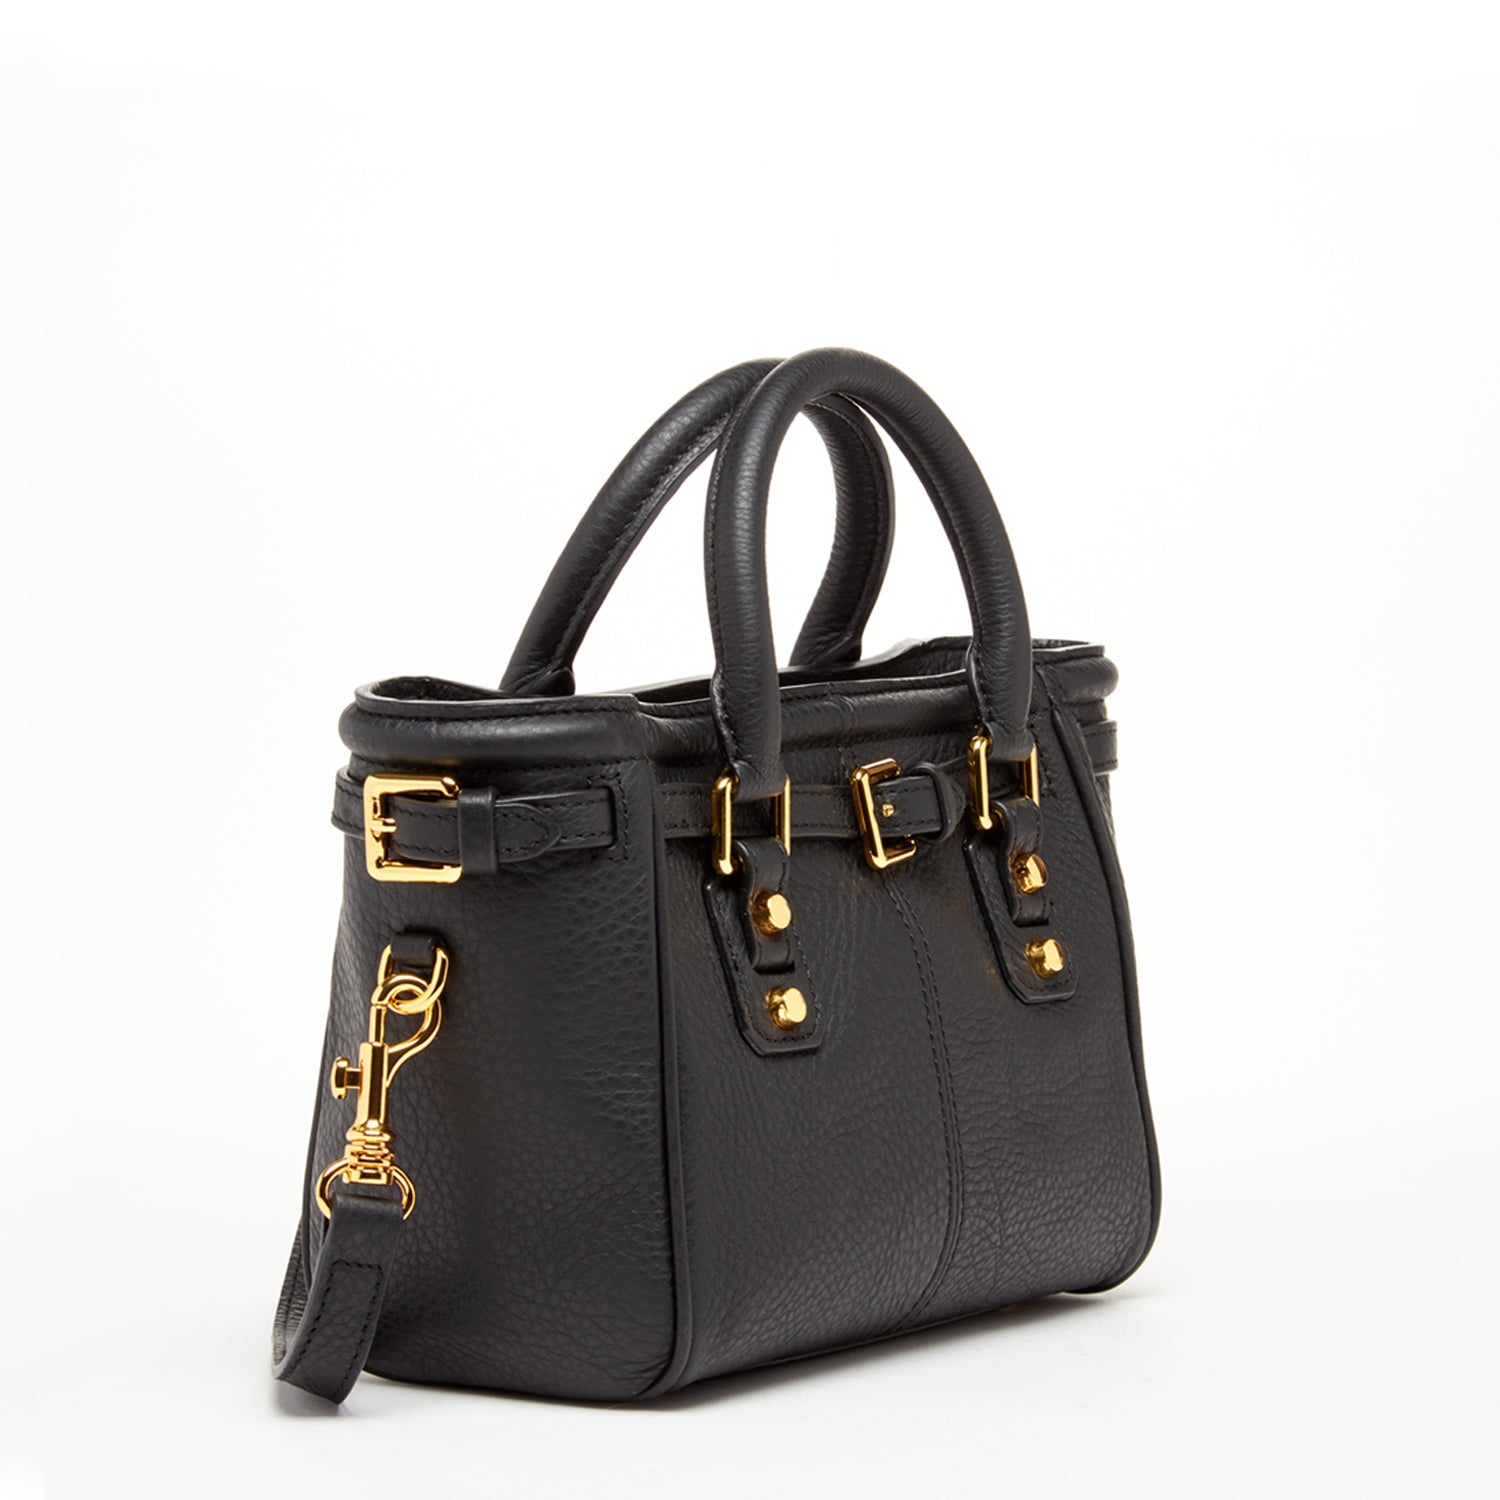  Discover the Timeless Elegance of the Emma Leather Satchel Bag in Black